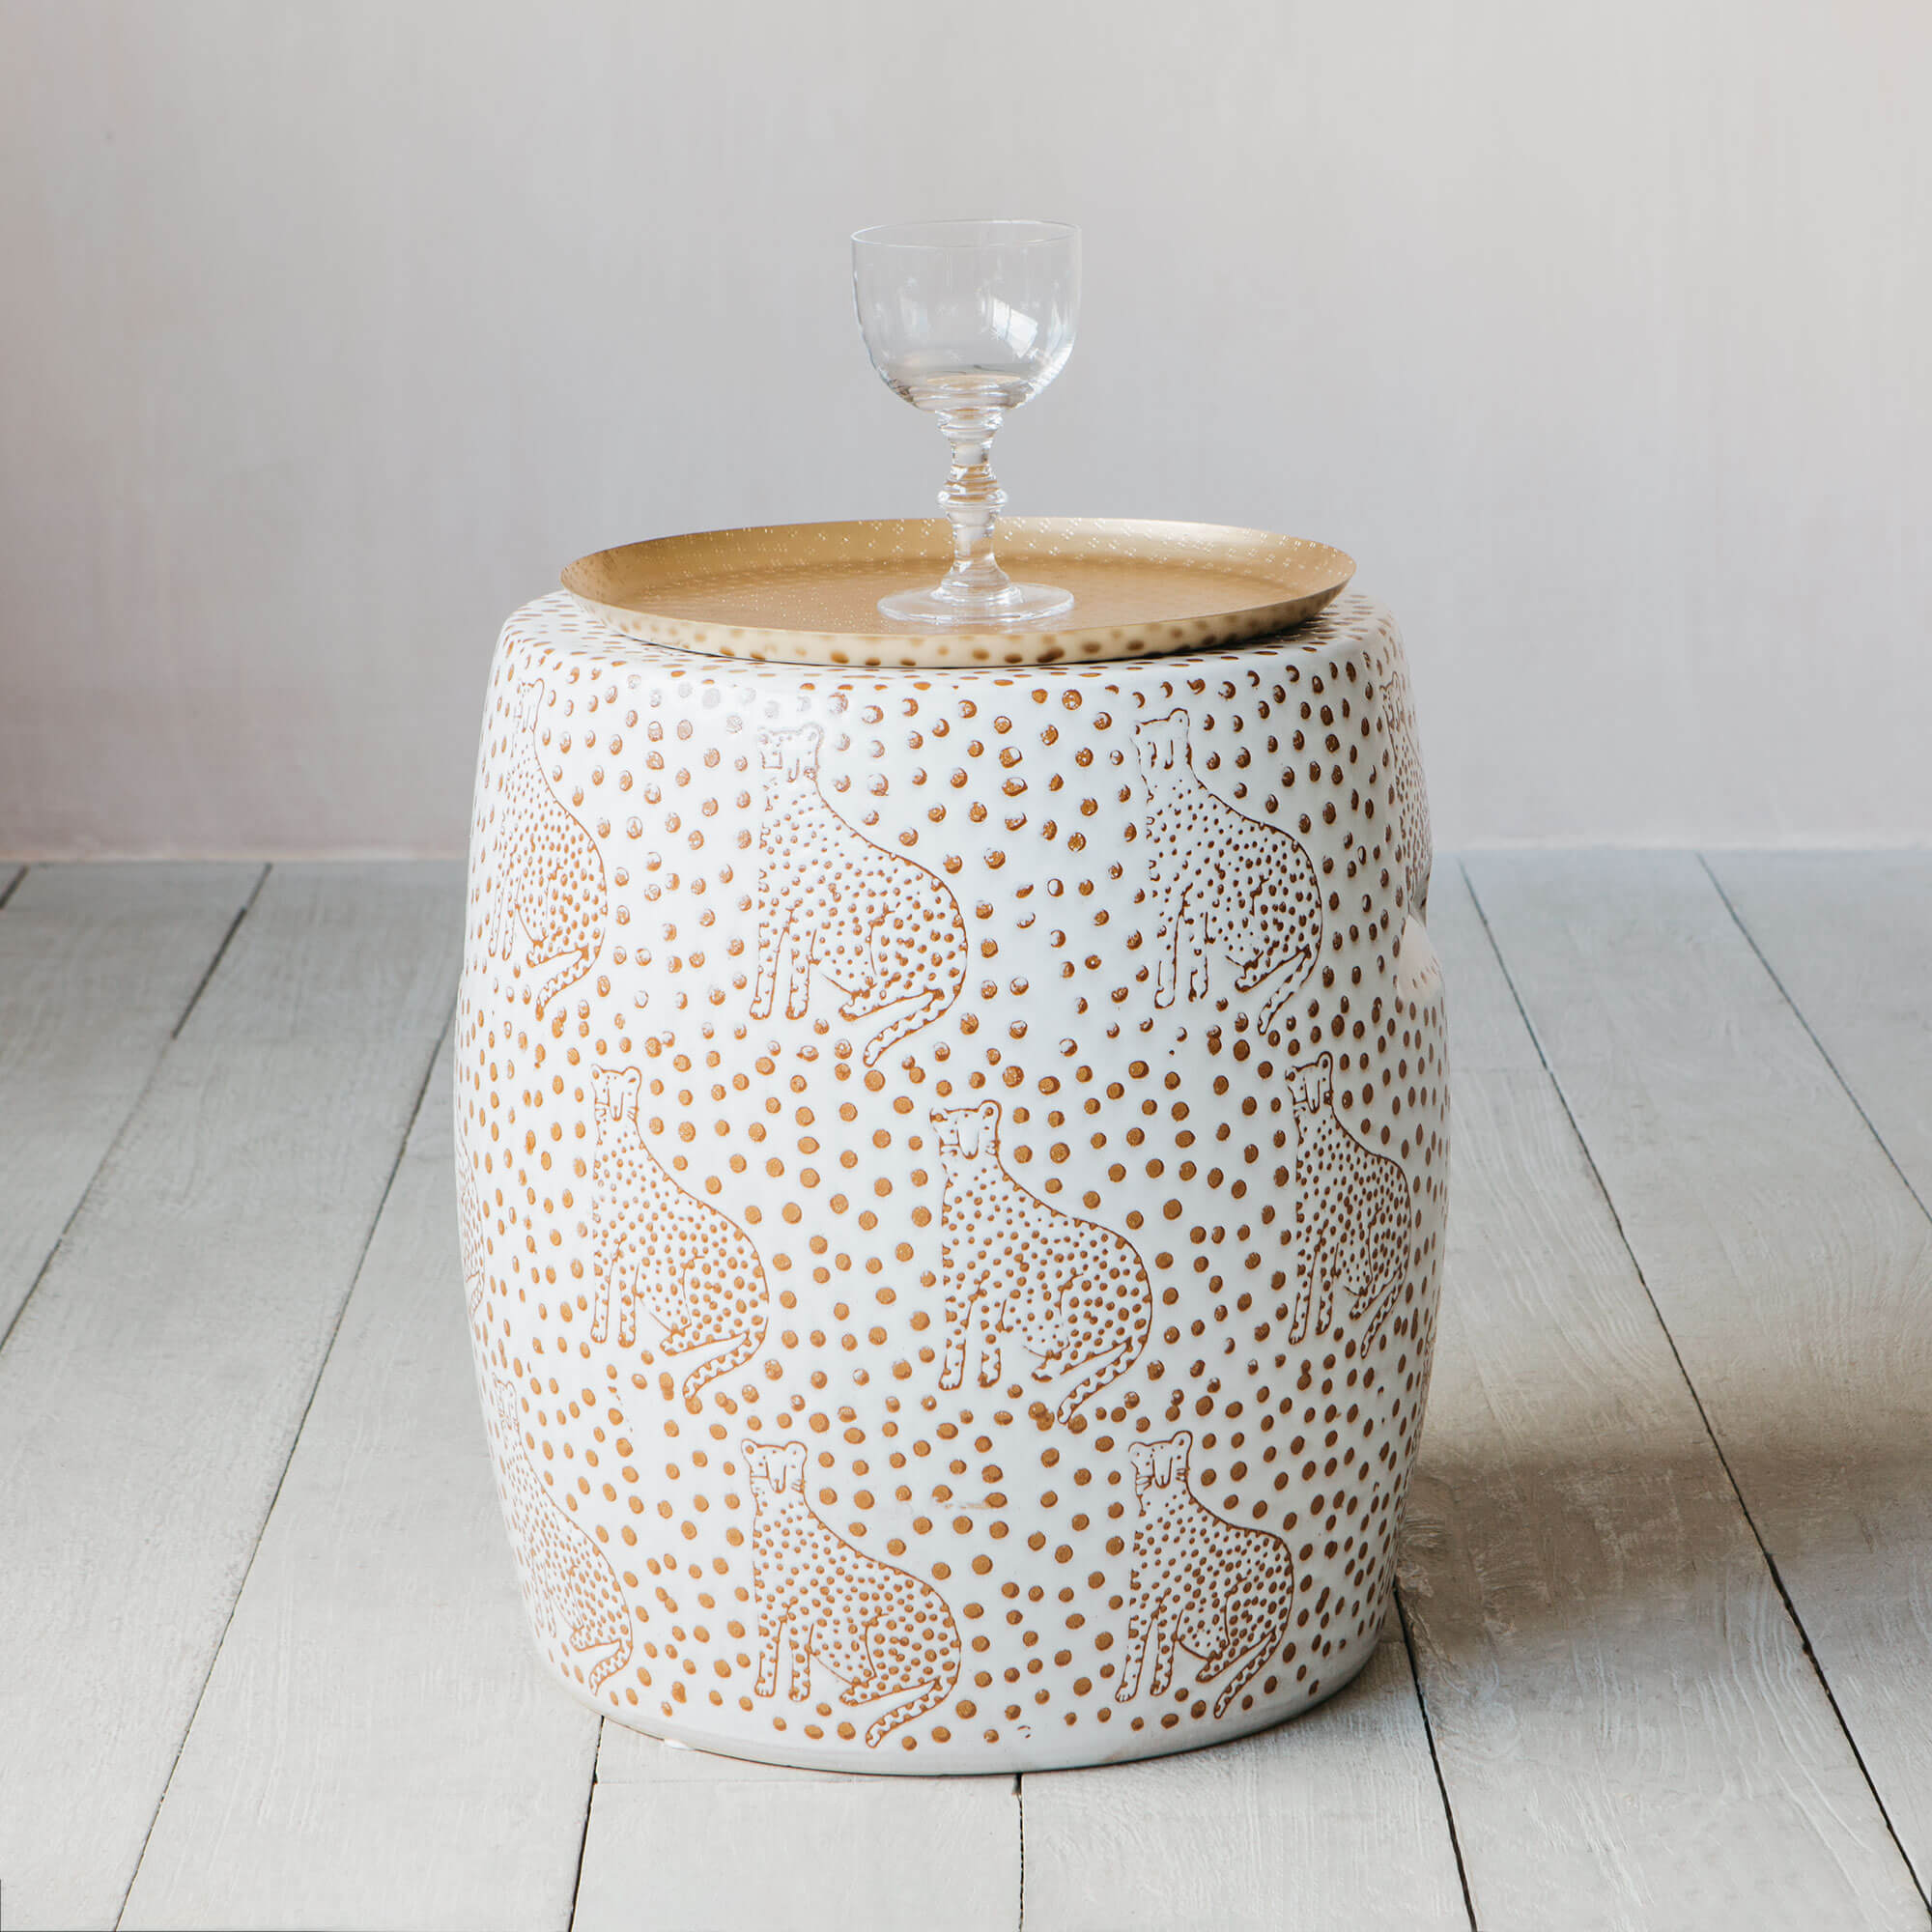 Read more about Graham and green white leopard stool